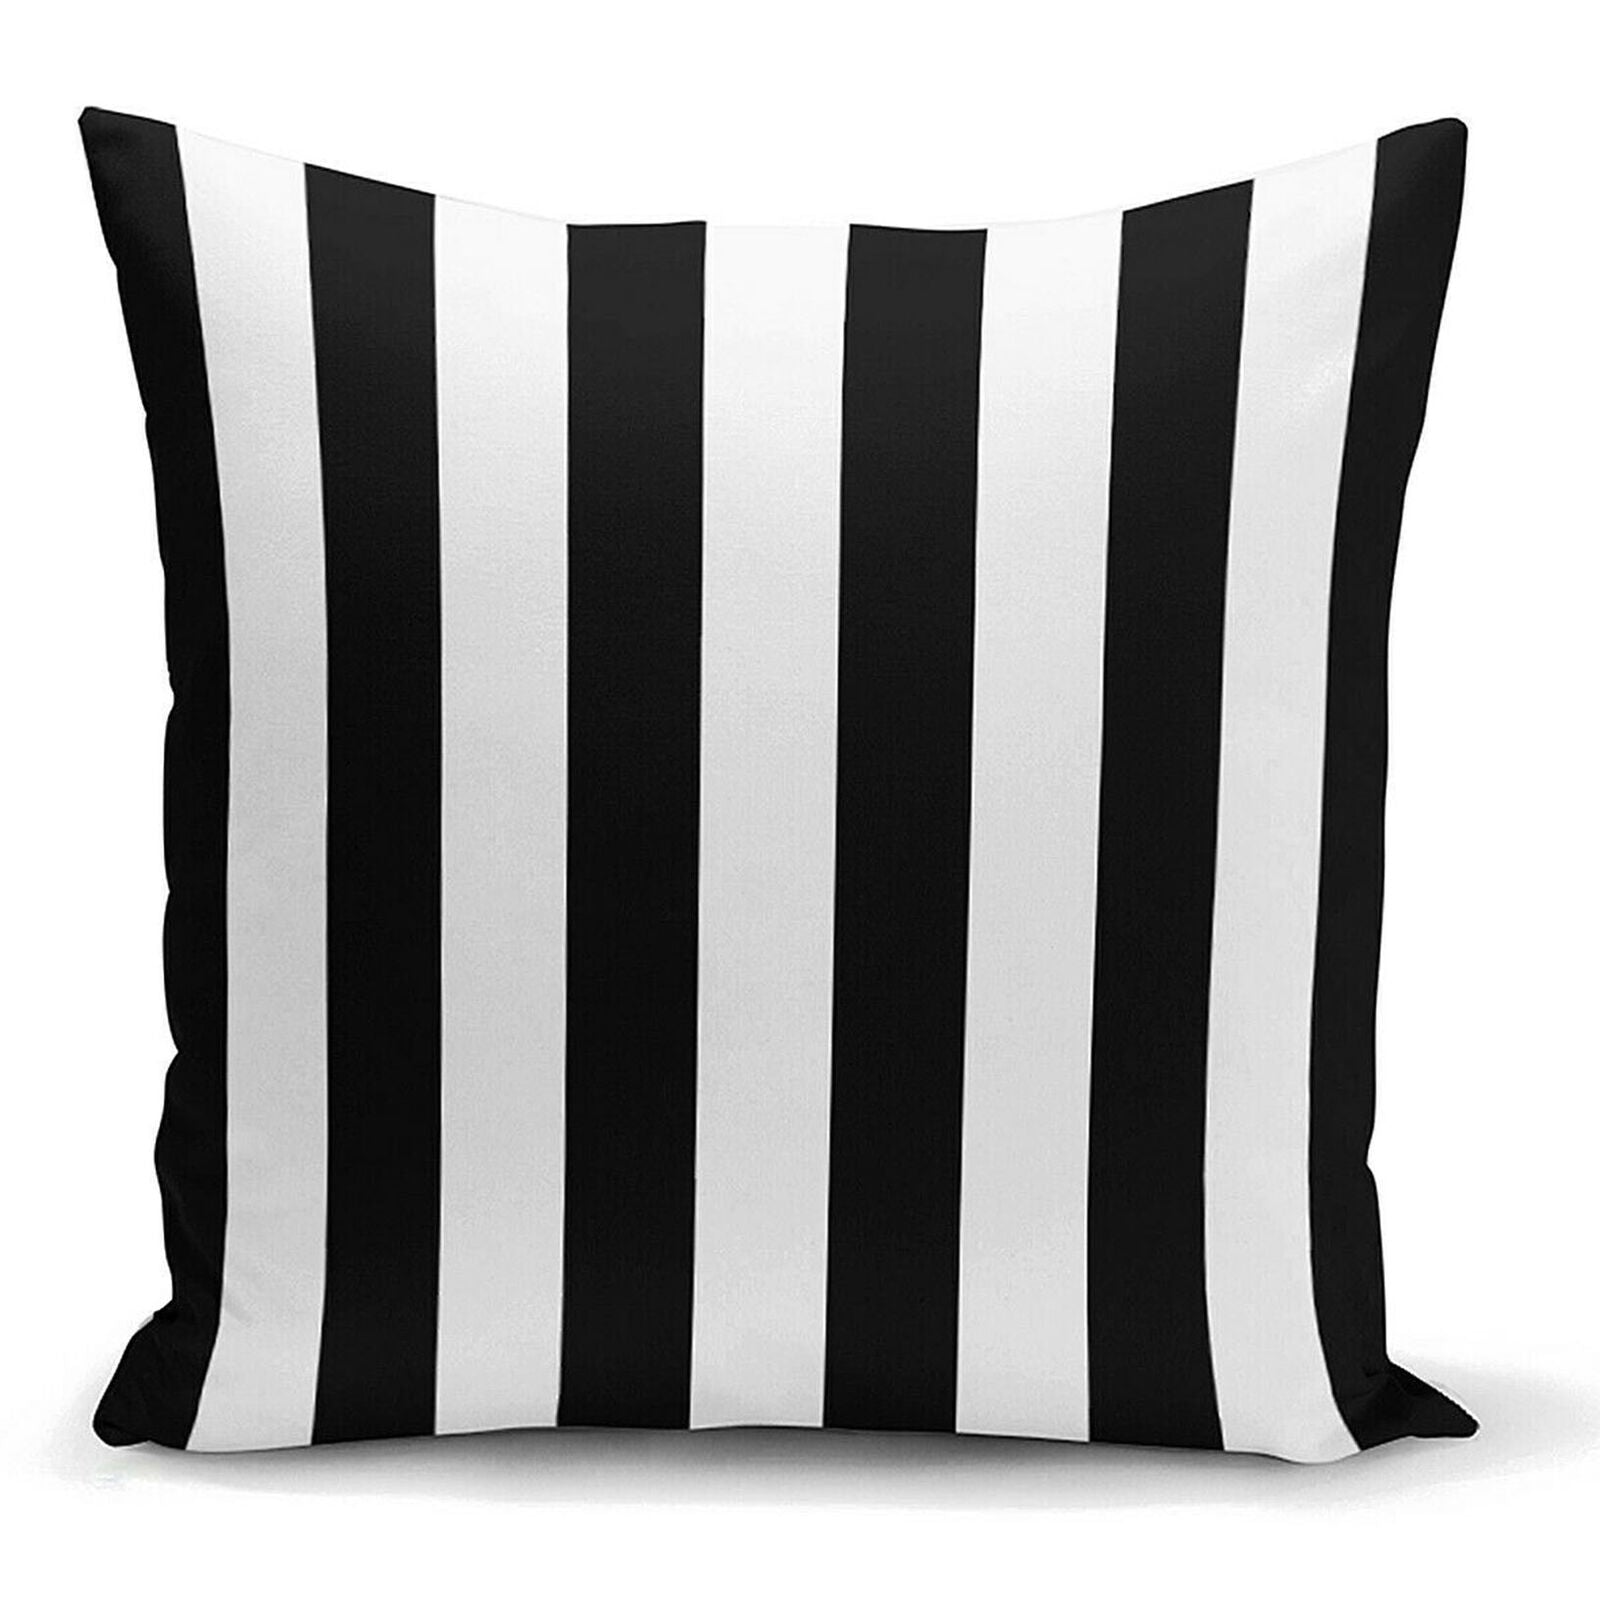 2 PCs Black and White Striped Decorative Throw Pillow Cushion Covers 18x18